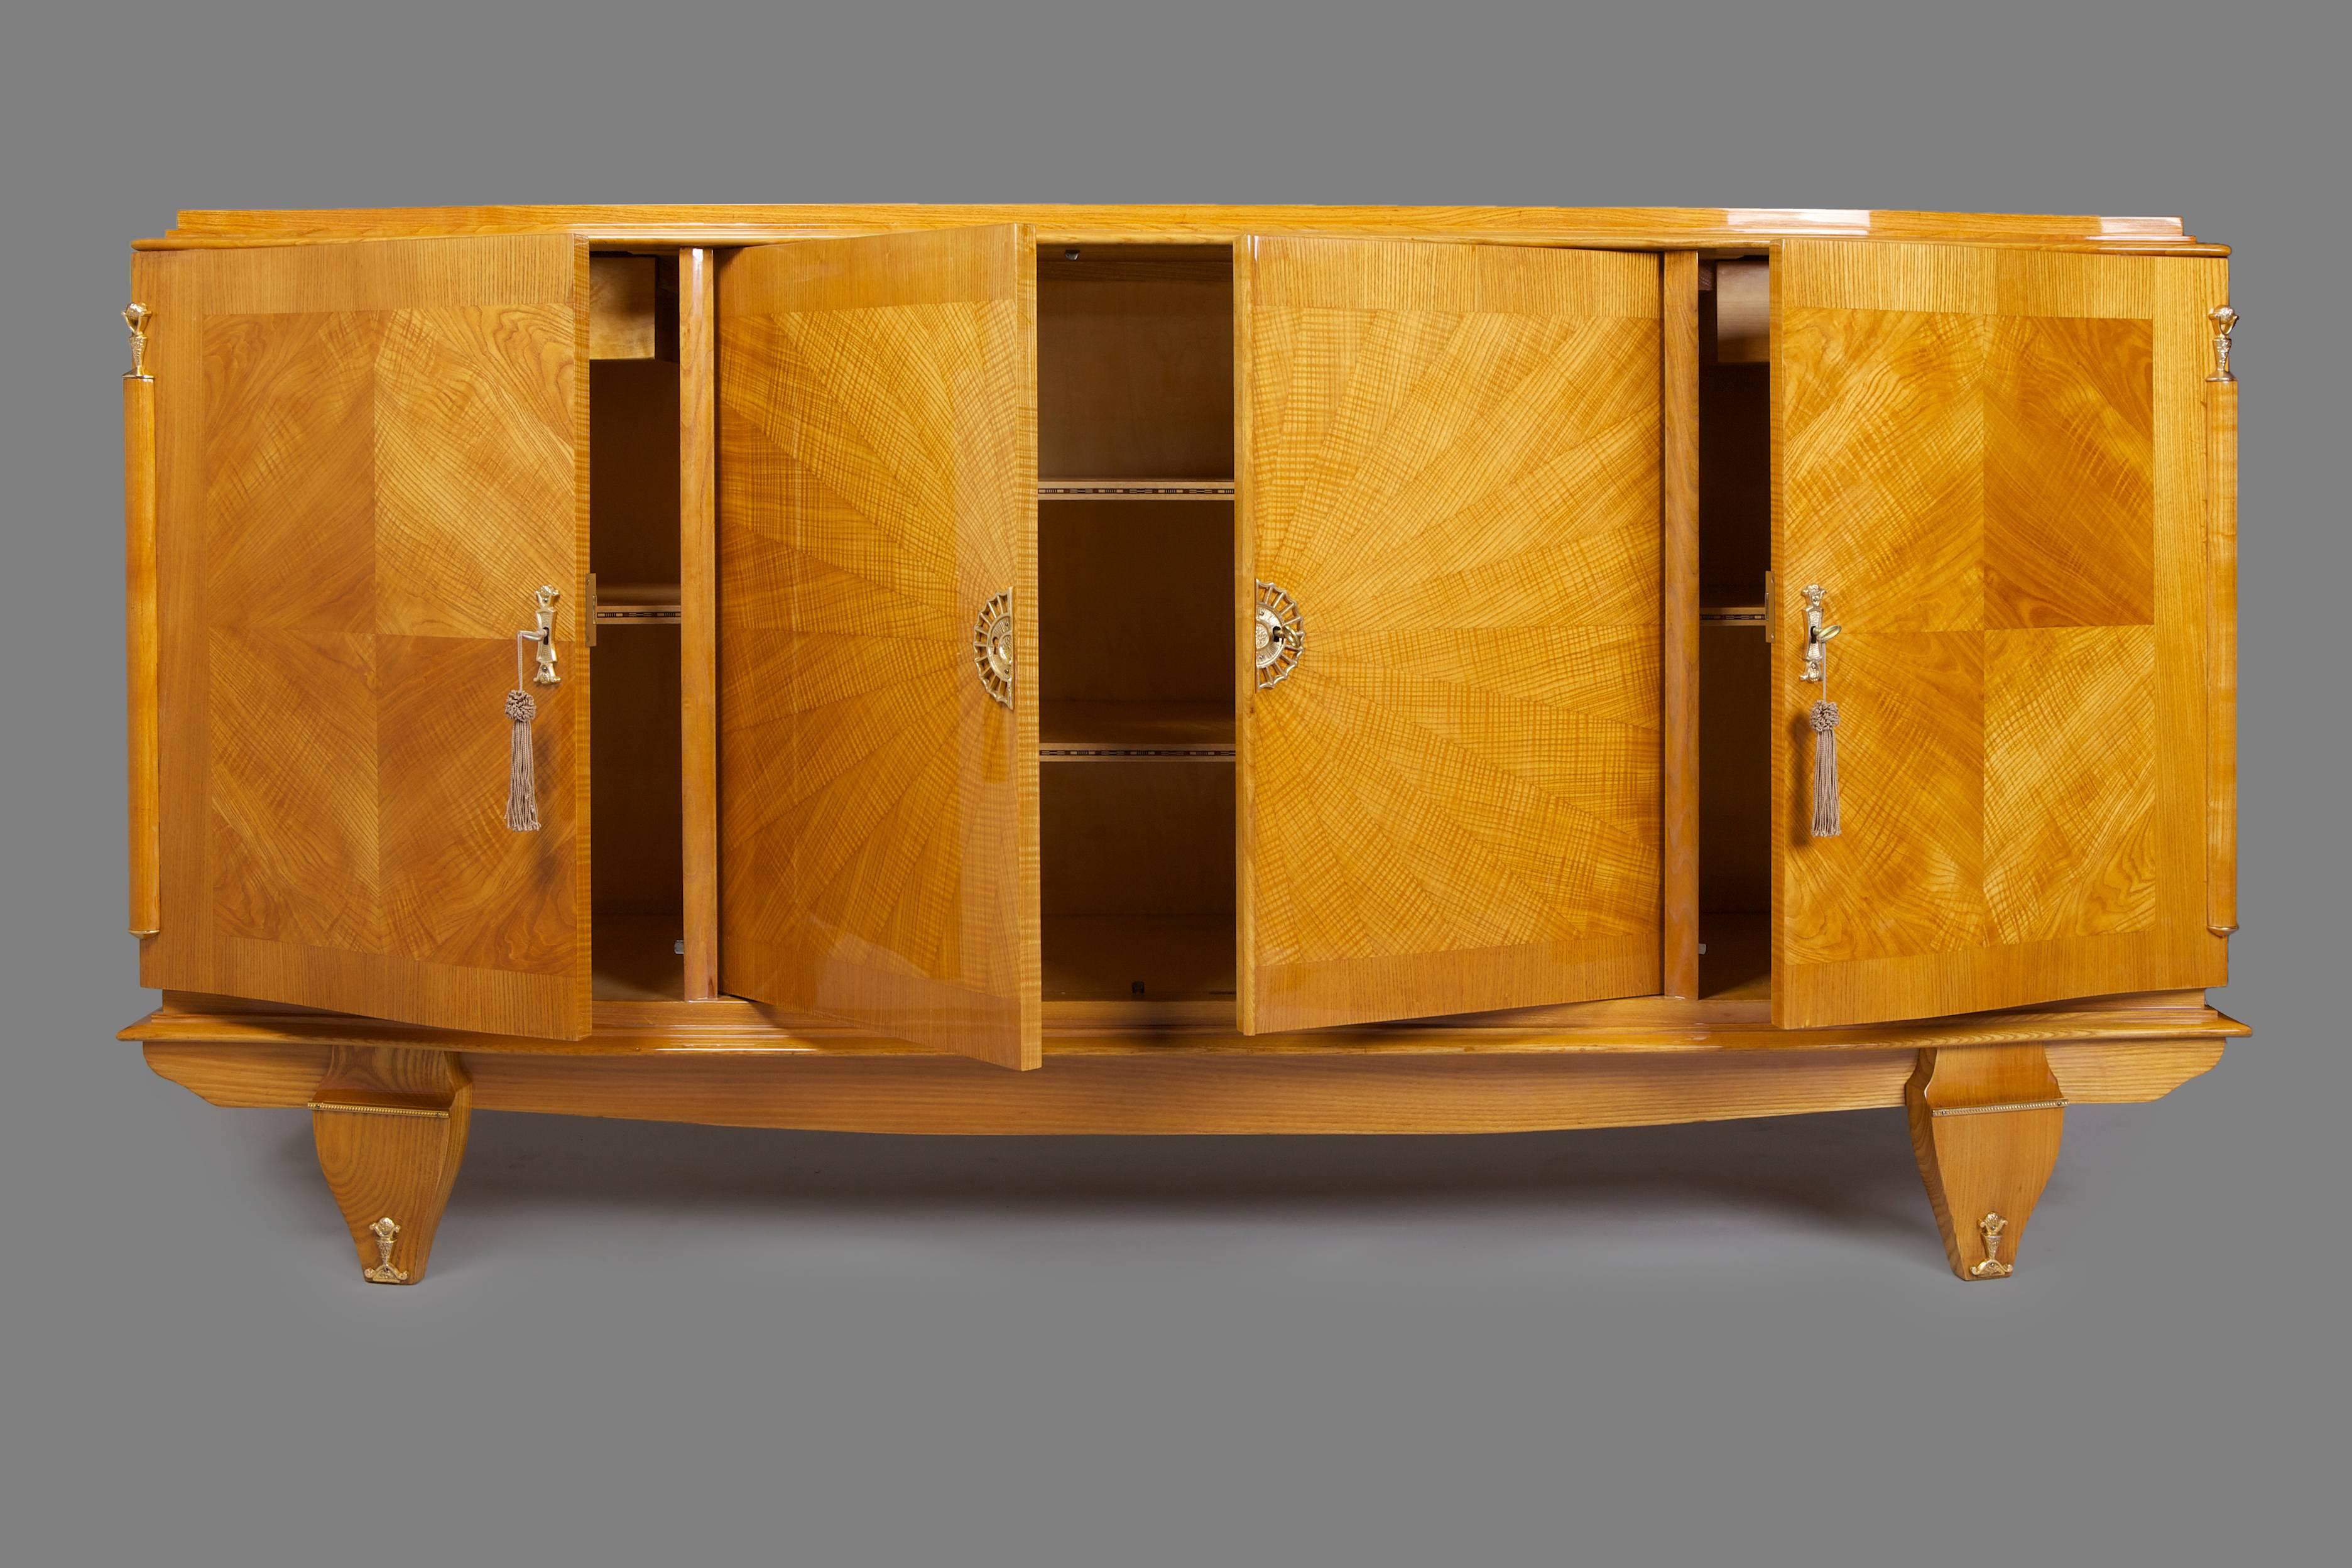 French Art Deco sideboard.
France. 
Ash-tree veneer. 
Surface was made by piano lacquers to the high gloss. 
Completely restored.